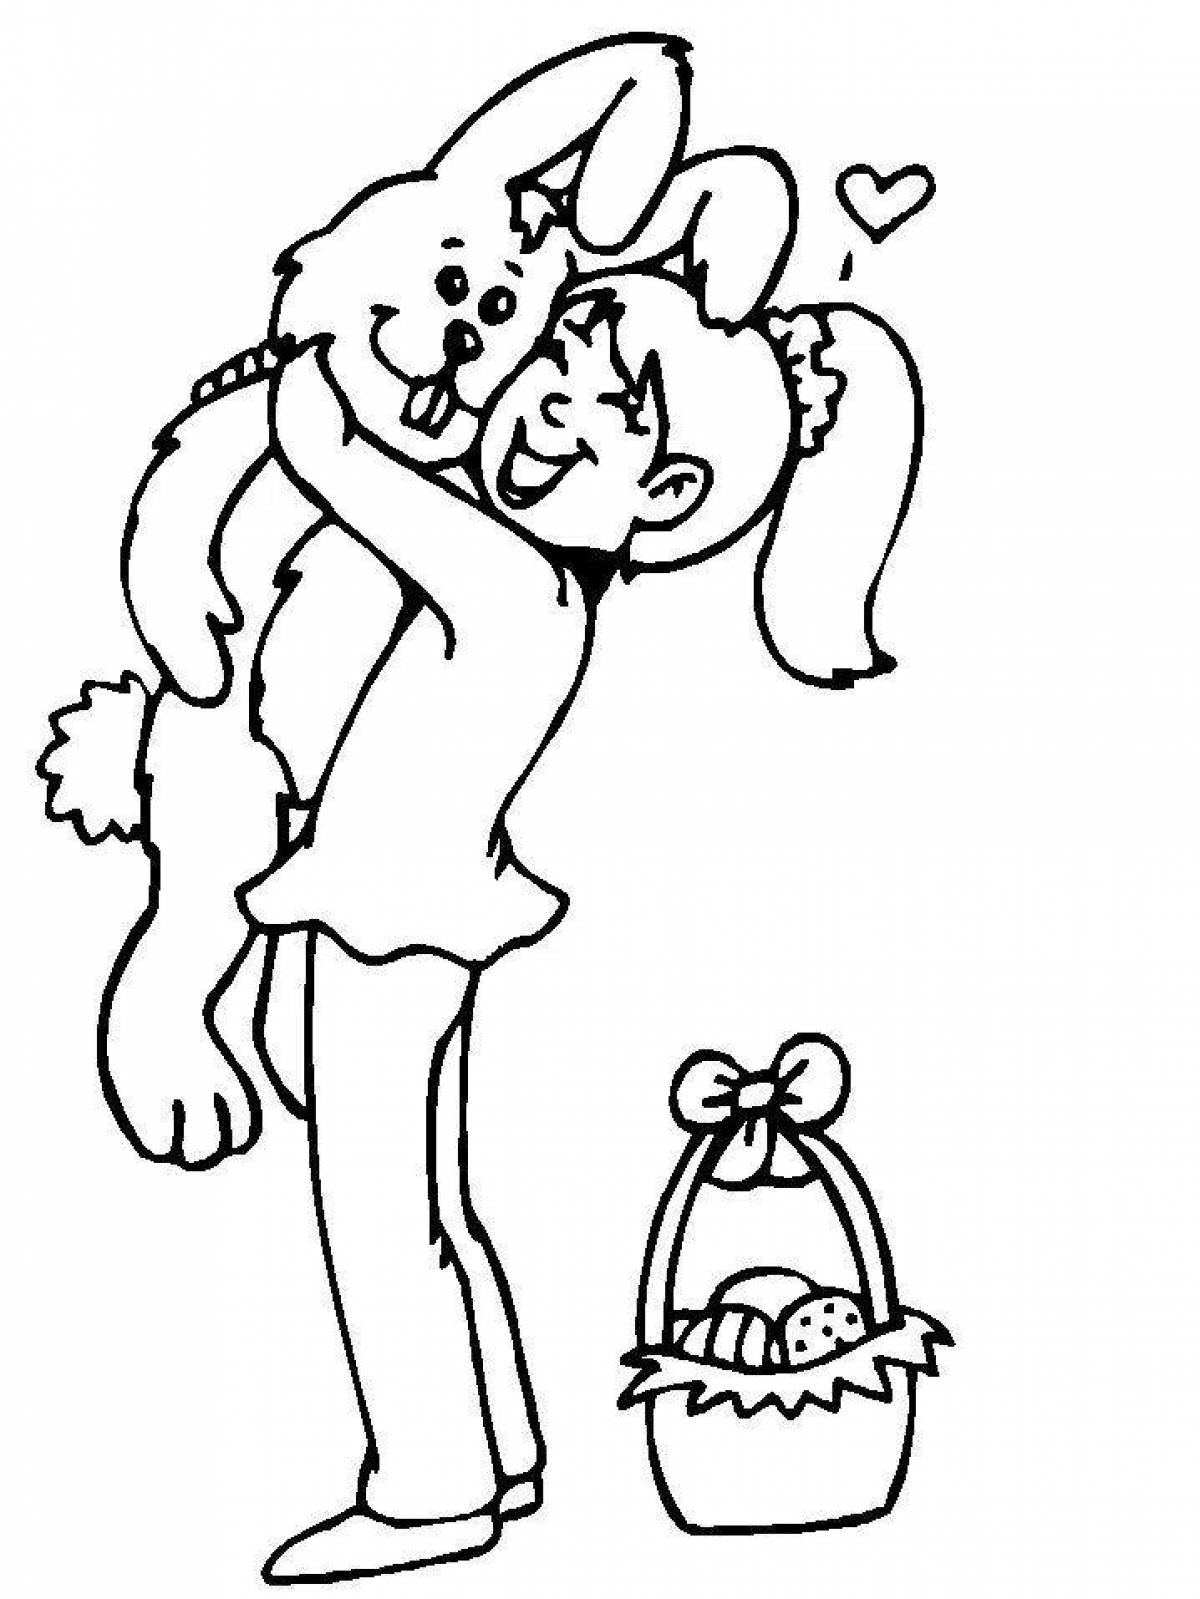 Delicious hug coloring pages